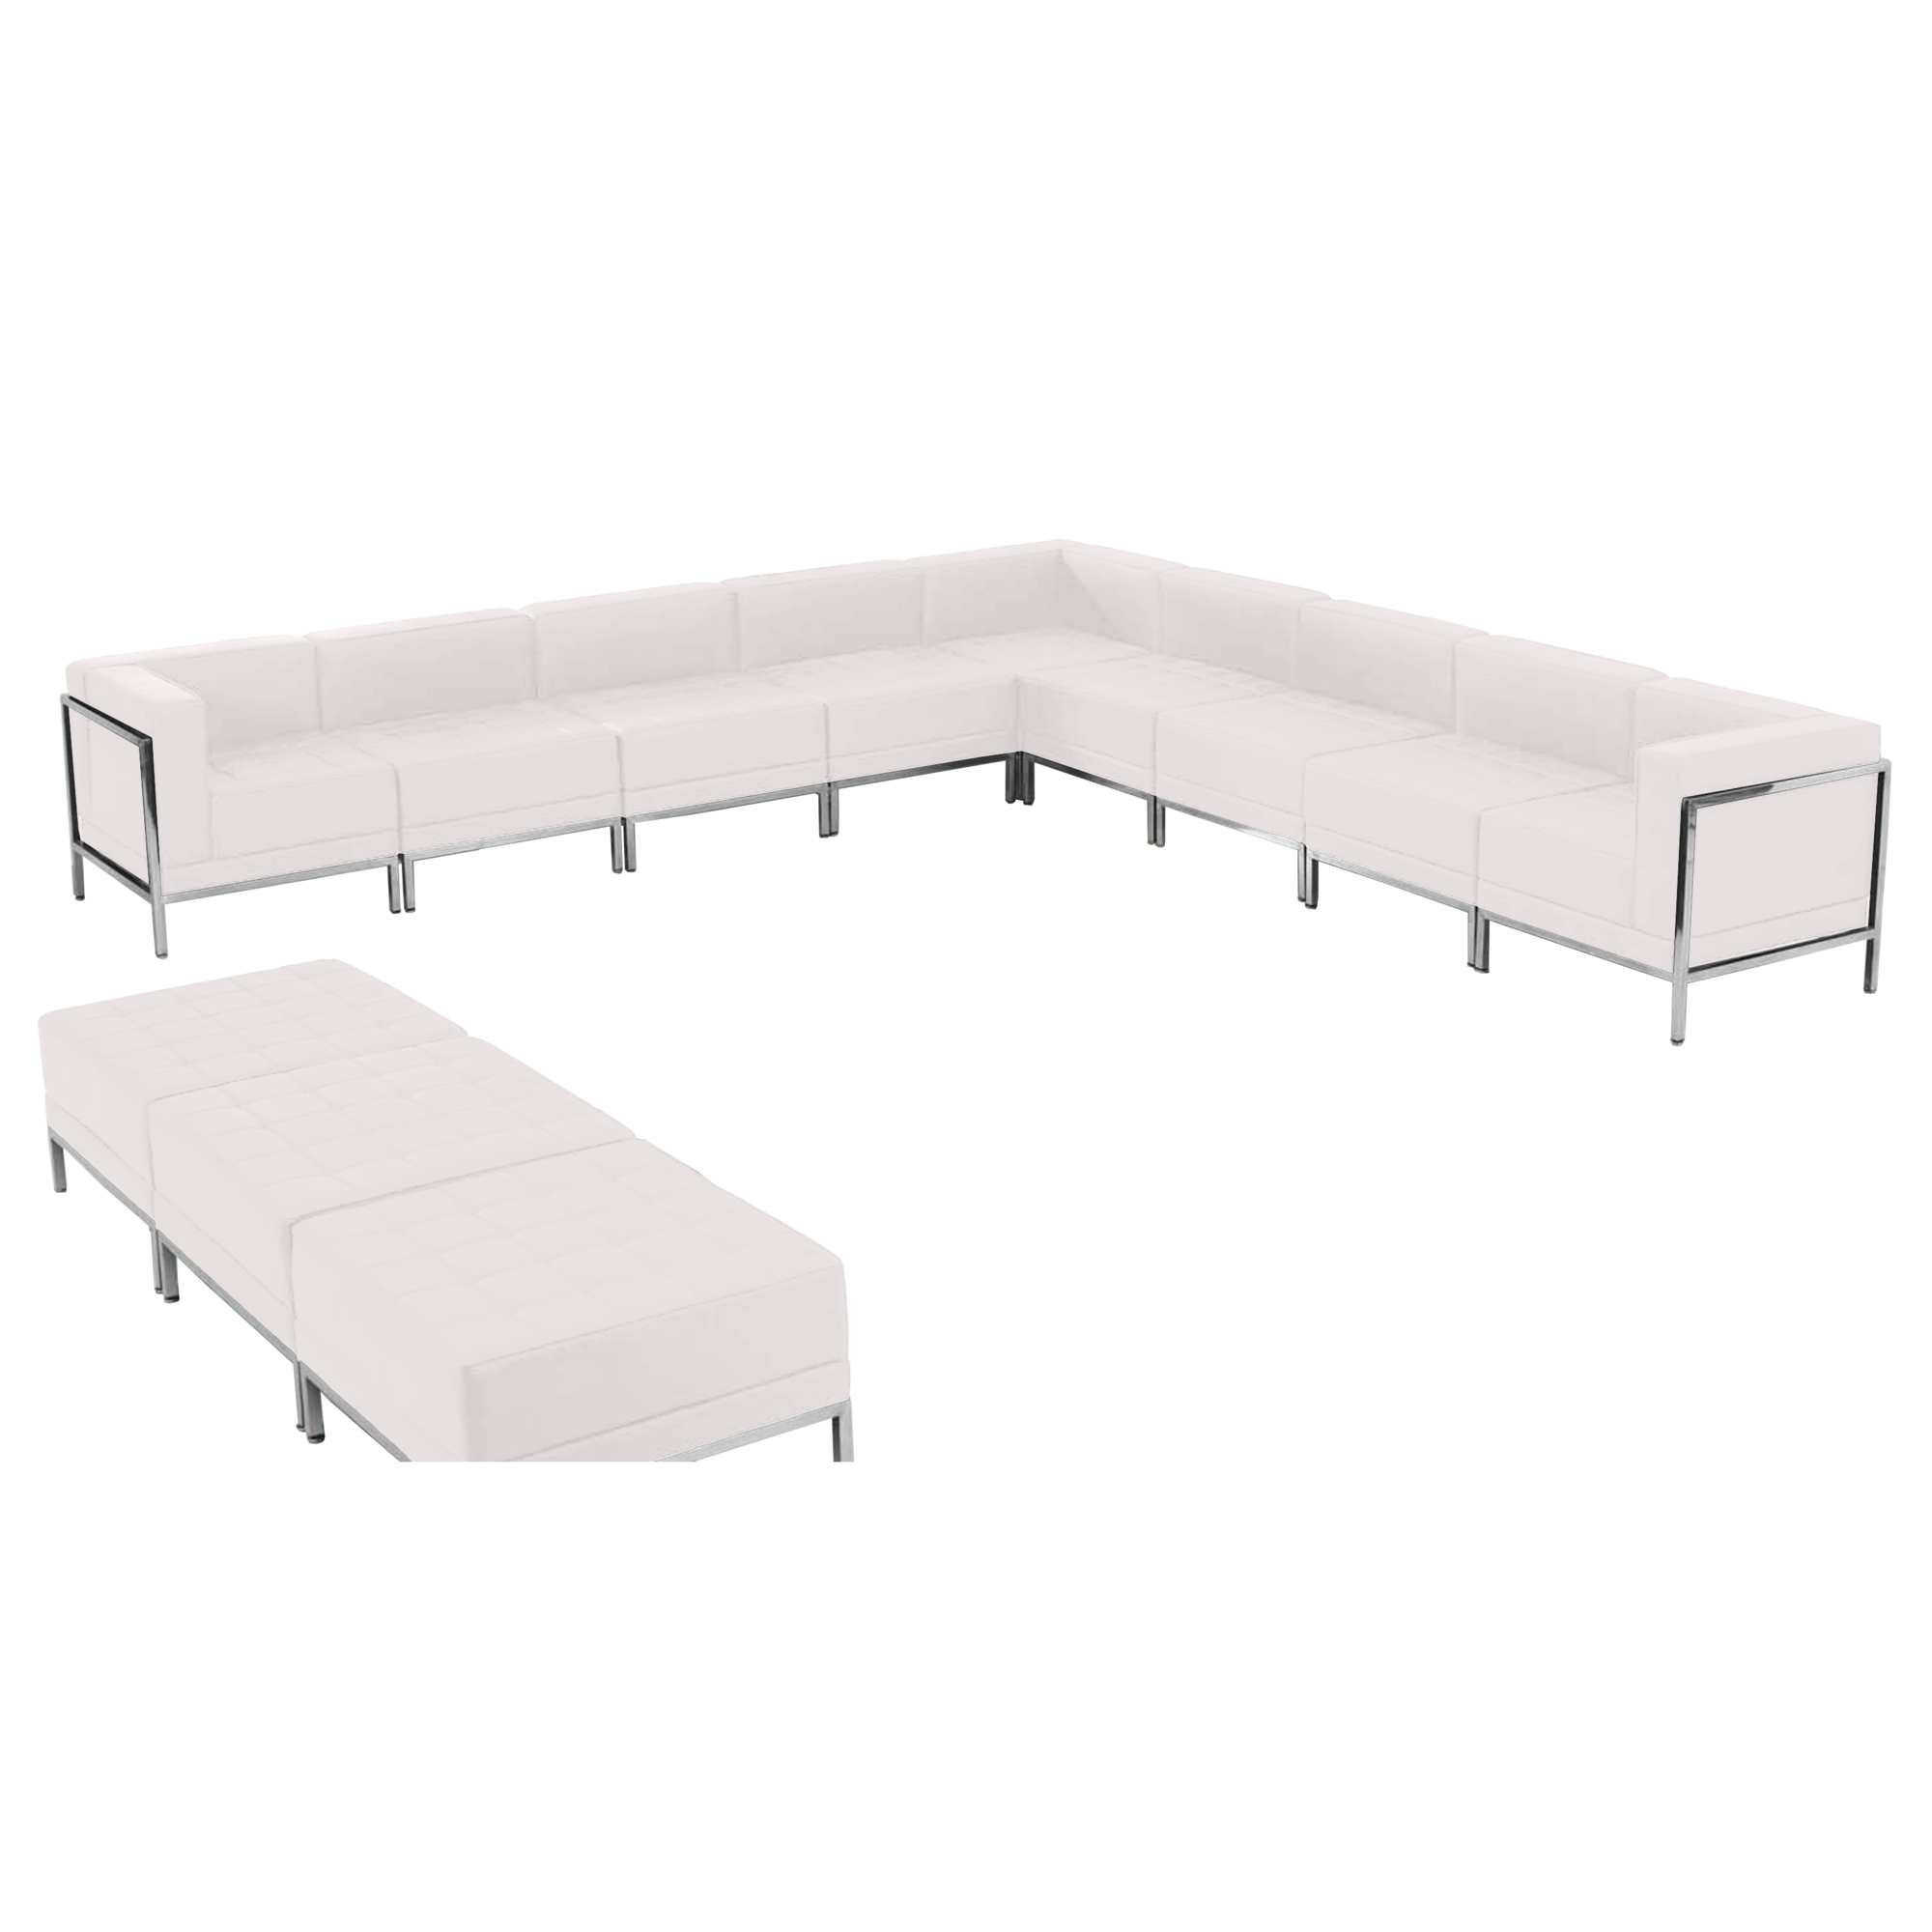 Flash Furniture, 12 Piece White LeatherSoft Sectional Ottoman Set, Primary Color White, Included (qty.) 12, Model ZBIMAGSET18WH